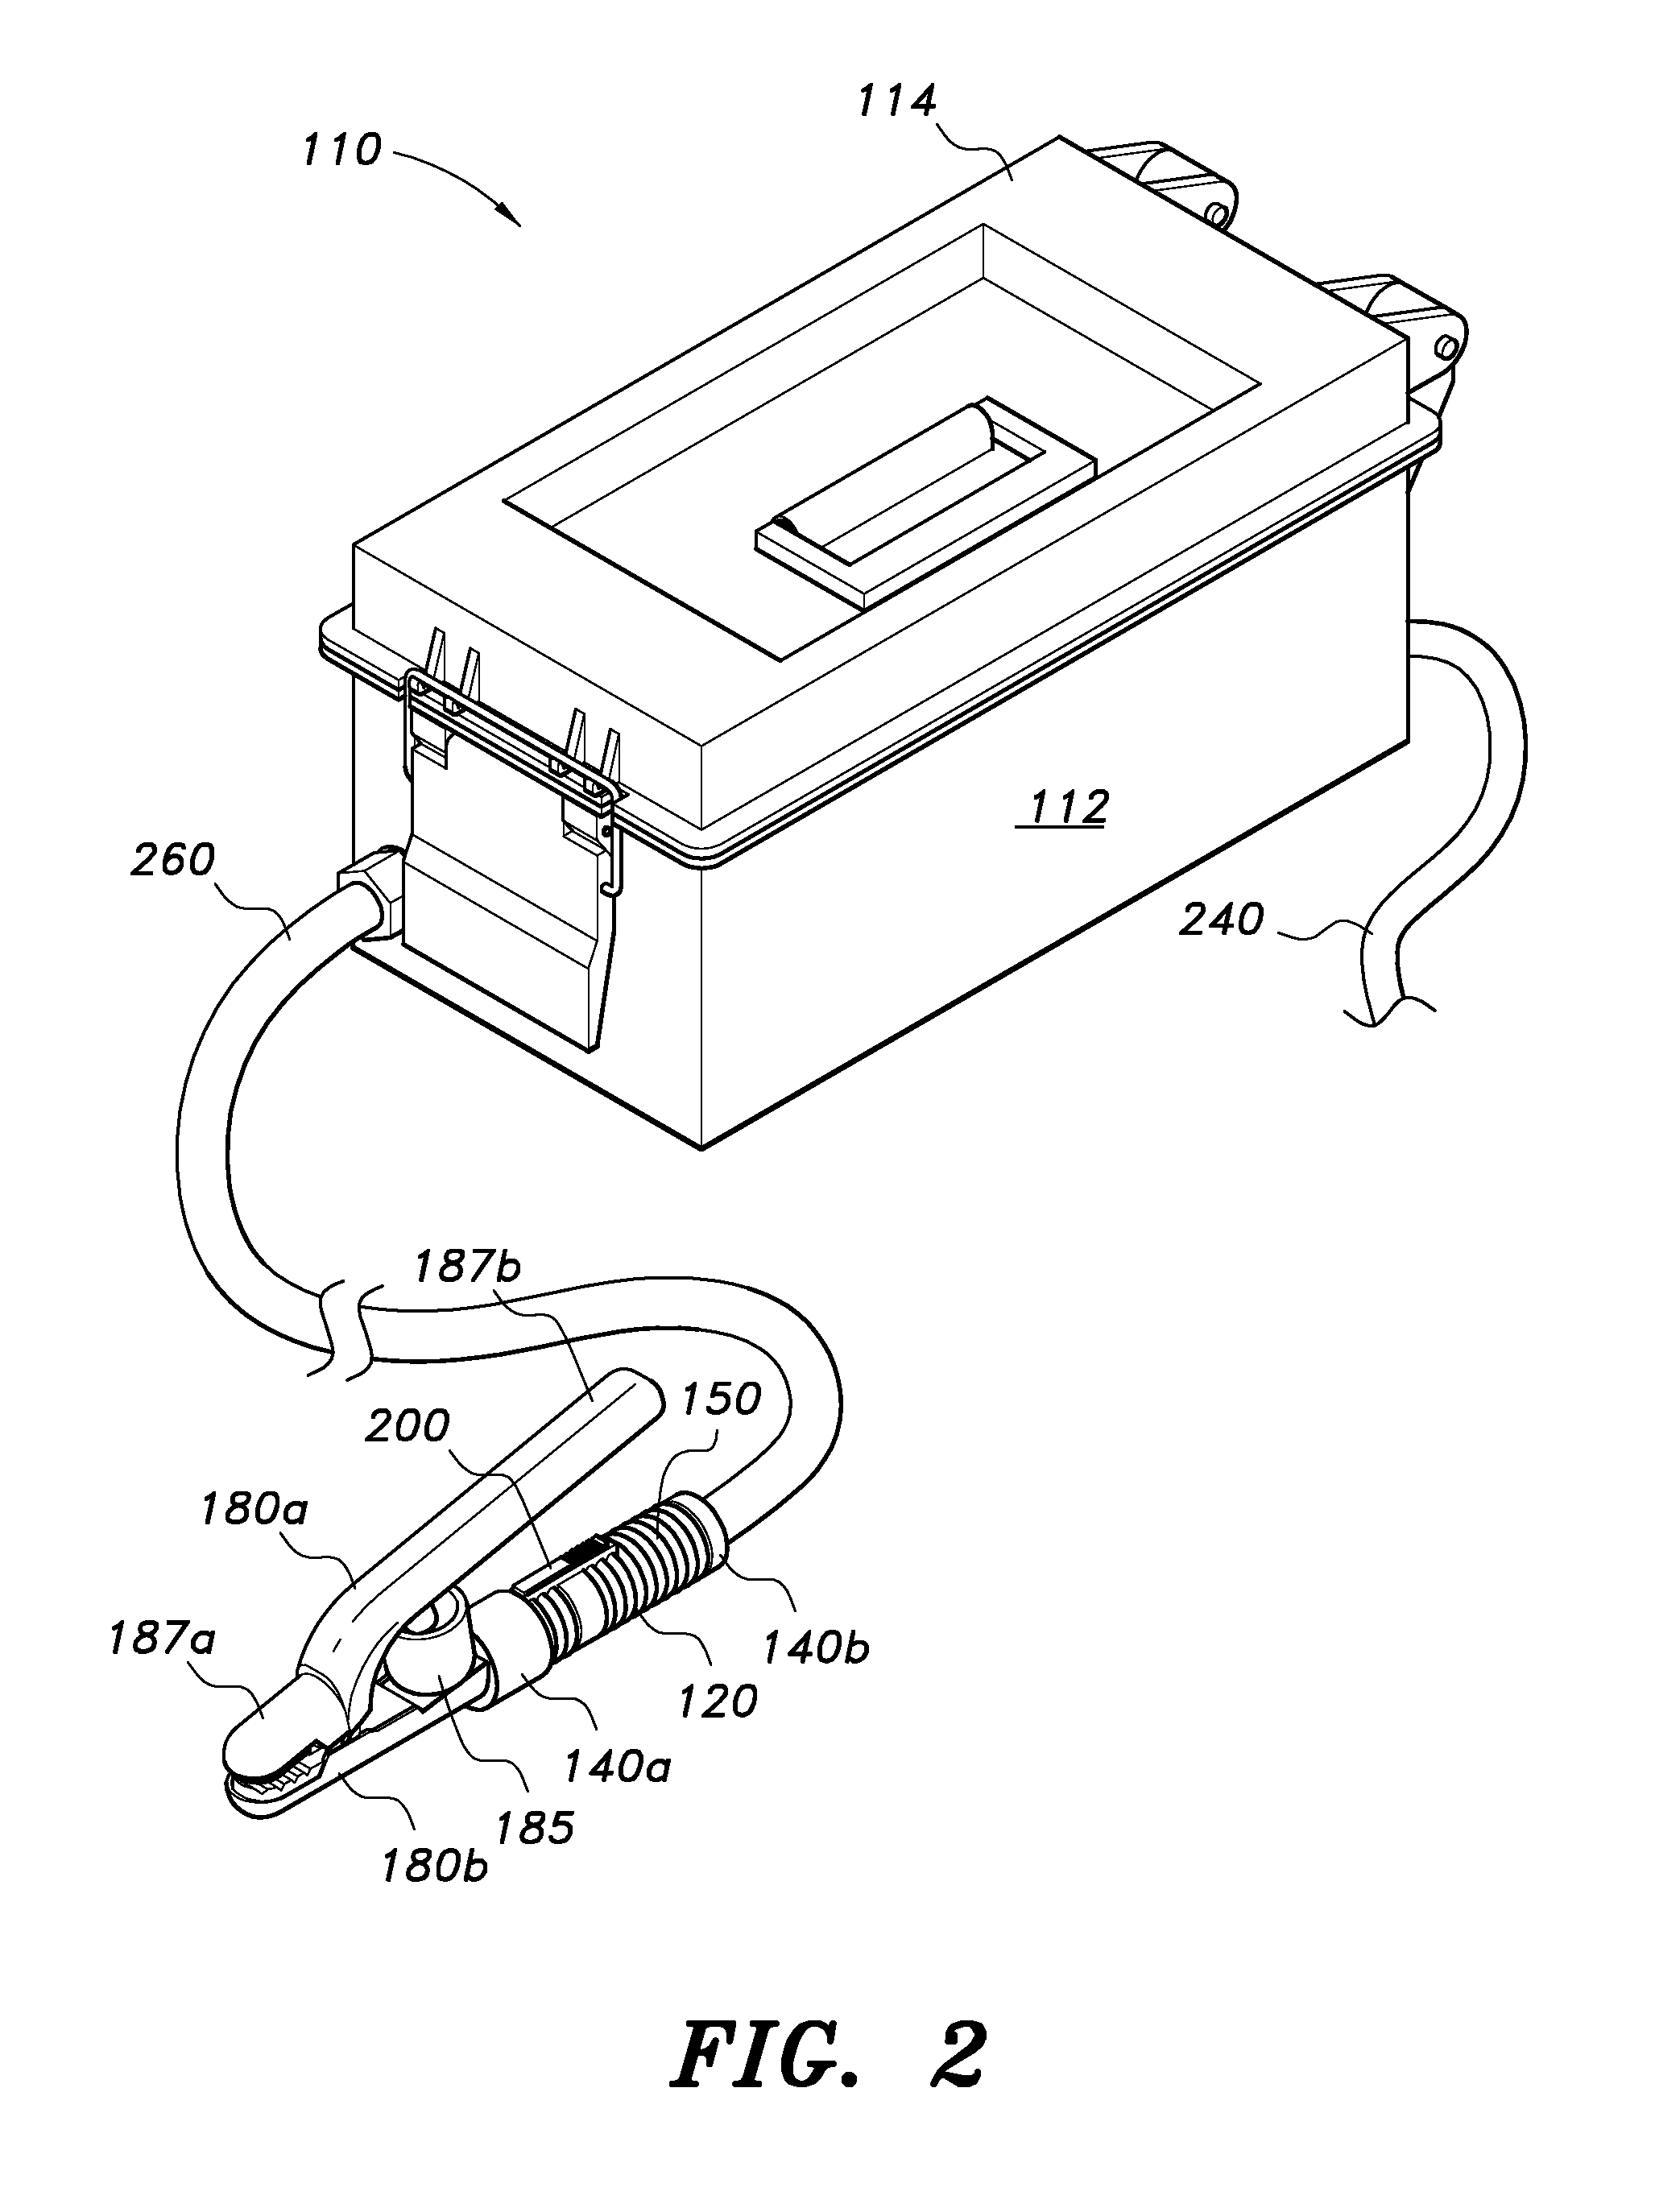 Electrode Holder with Automatic Power Cutoff